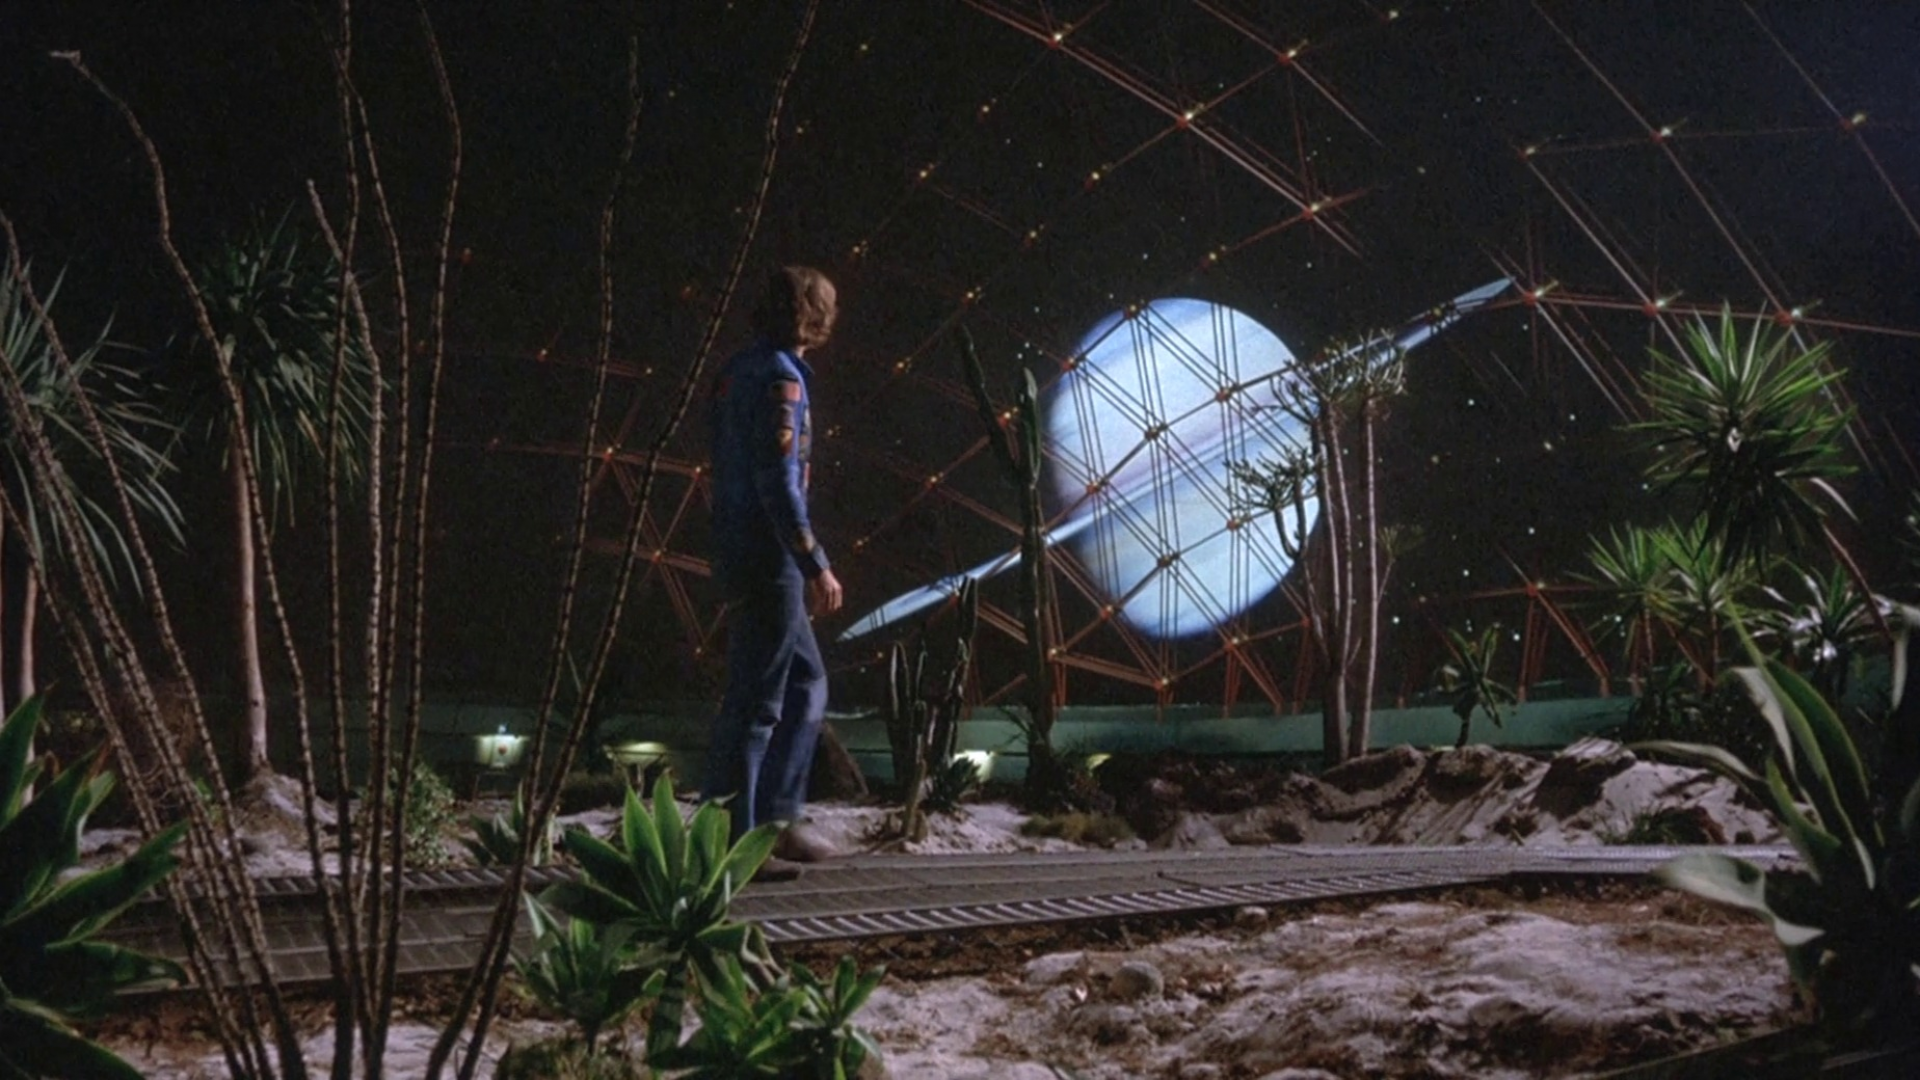 Glass dome in Silent Running. Backdrop of space, but plants are growing here.